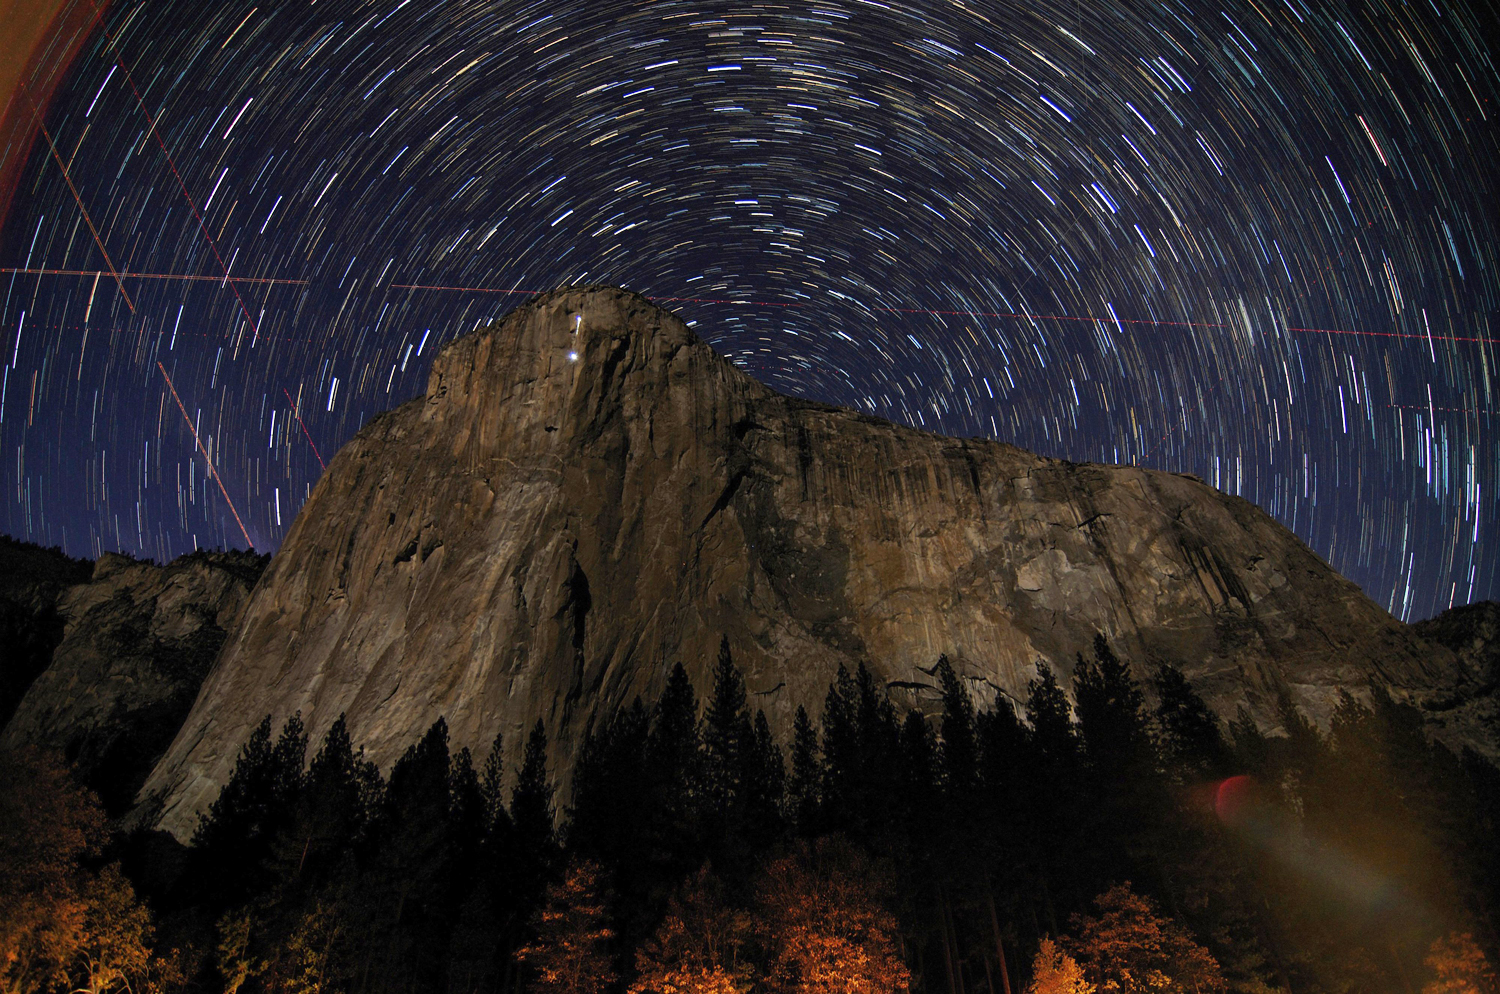 Star trails are visible over the granite face of El Capitan in Earth's Yosemite National Park in this image taken on November 8, 2013 and in March 2014.